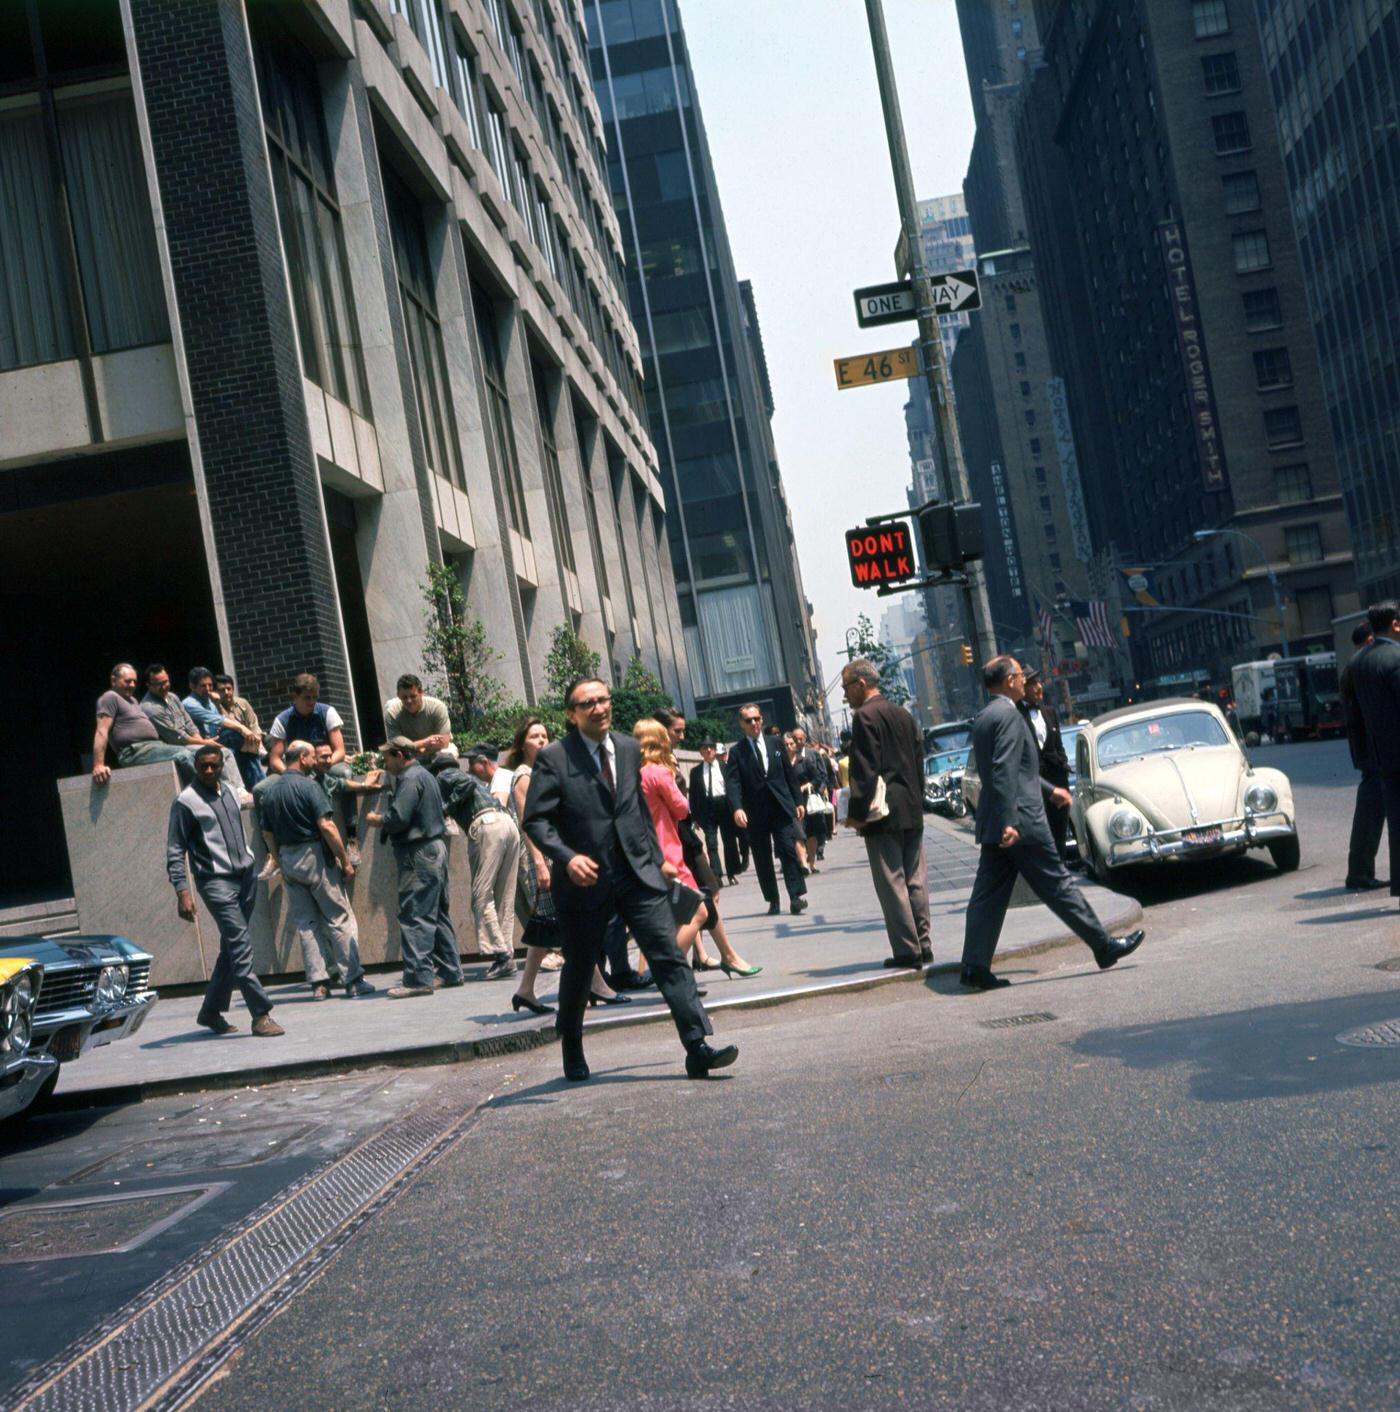 Crowds At The Intersection Of East 46Th Street And Lexington Avenue, Midtown Manhattan, 1967